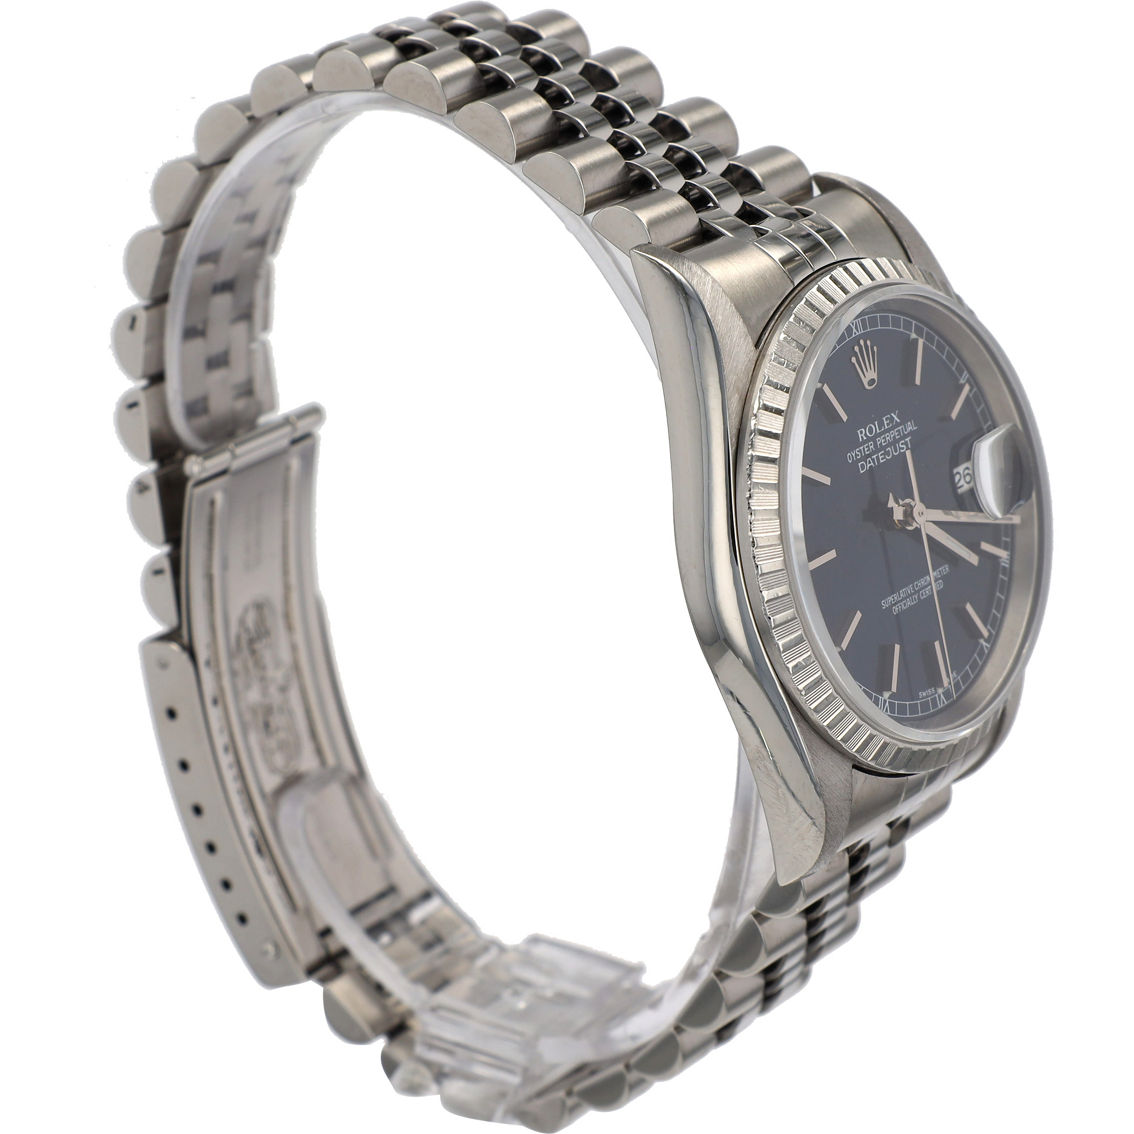 Rolex Men's Datejust Watch WLROLEX:OE77 (Pre-Owned) - Image 3 of 6